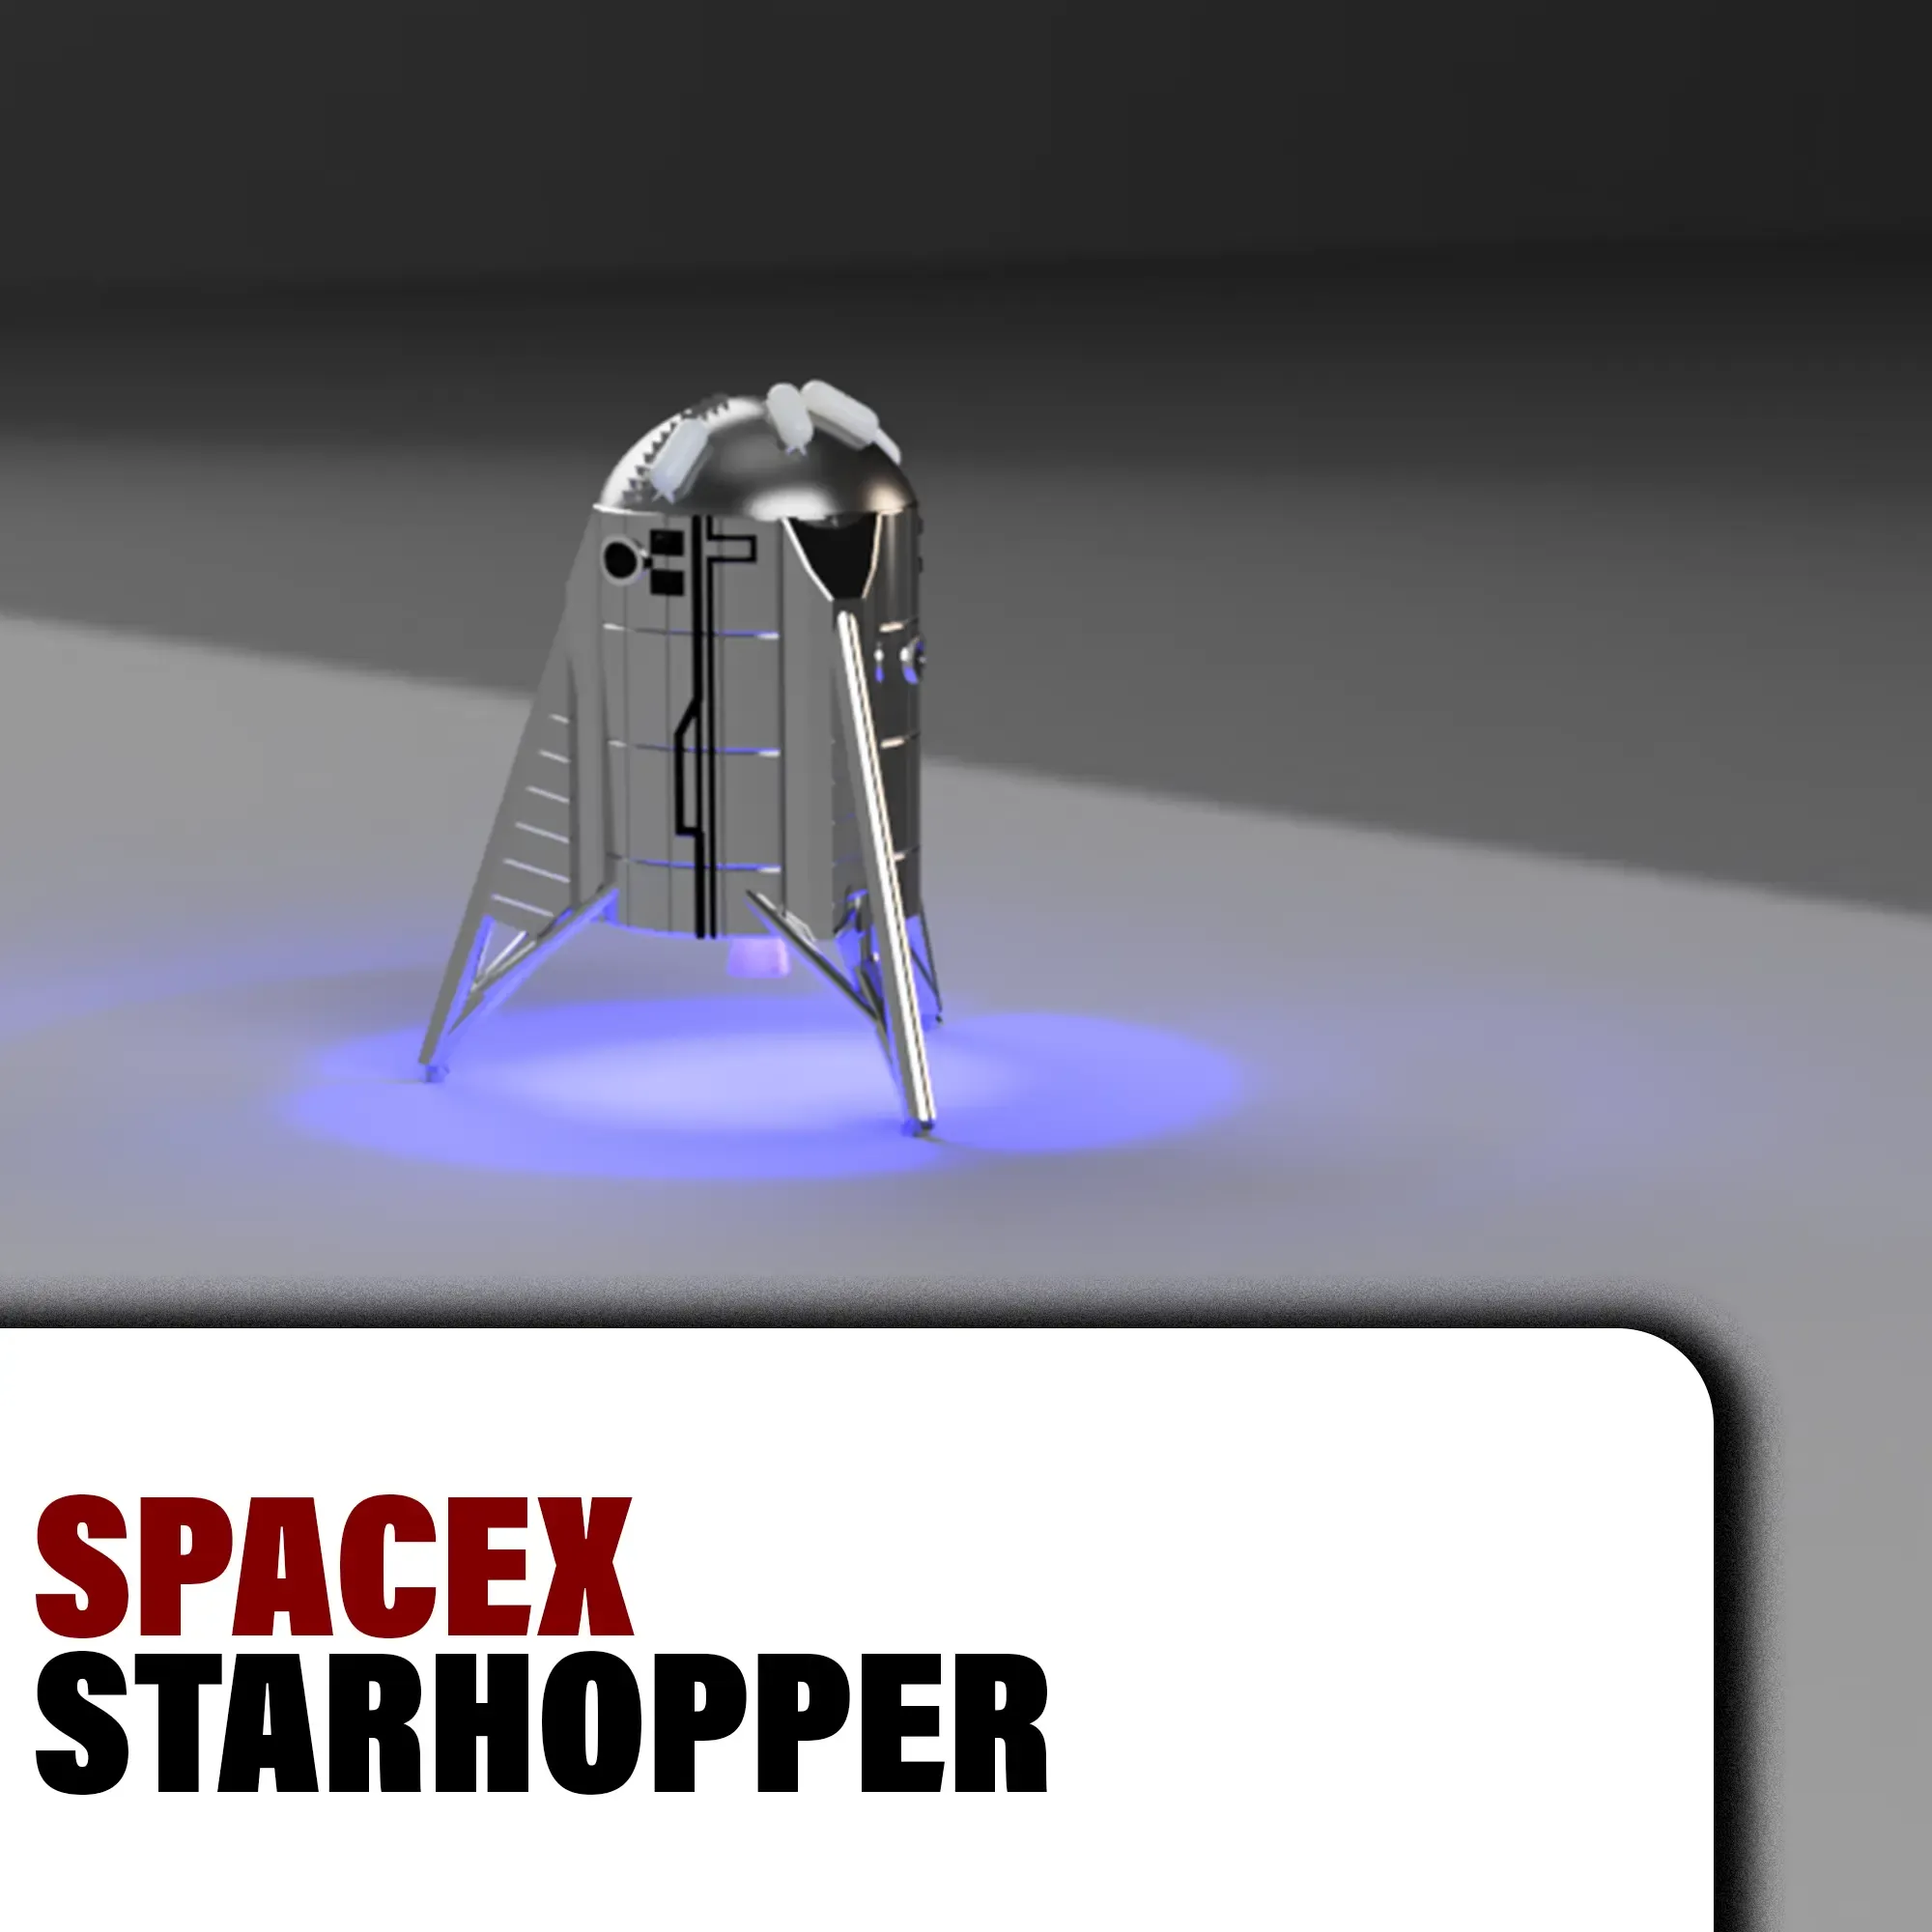 SpaceX Starhopper | Leds Inside